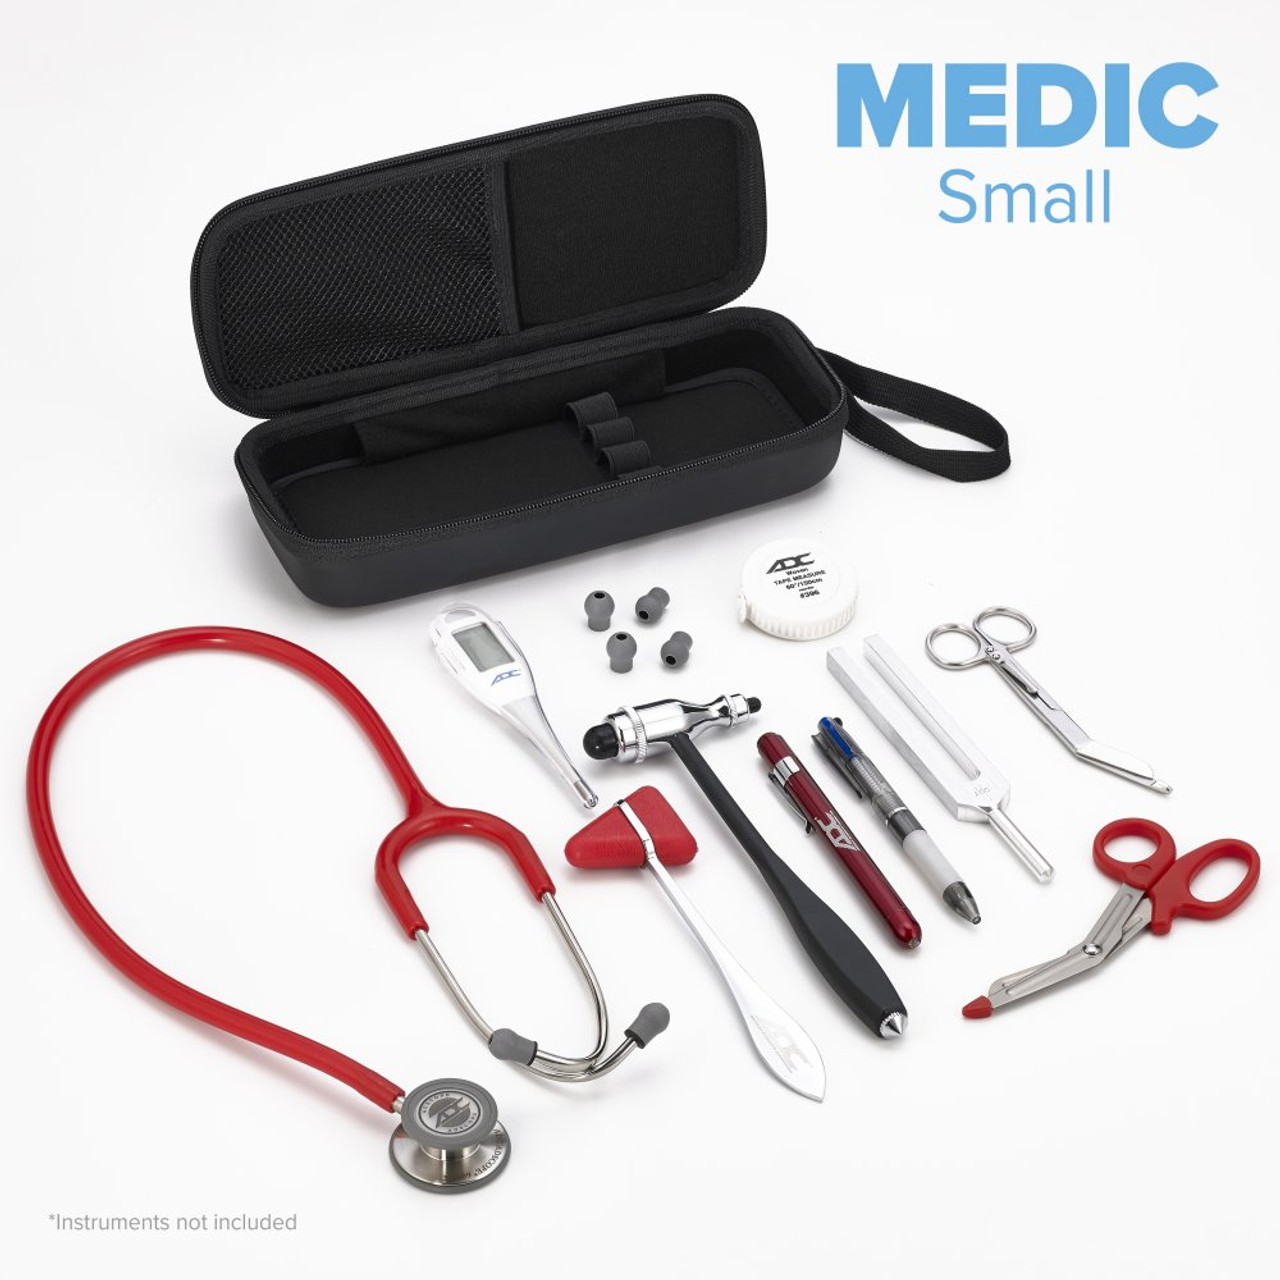 ADC MEDIC Small Every-Day Instrument Carry Case